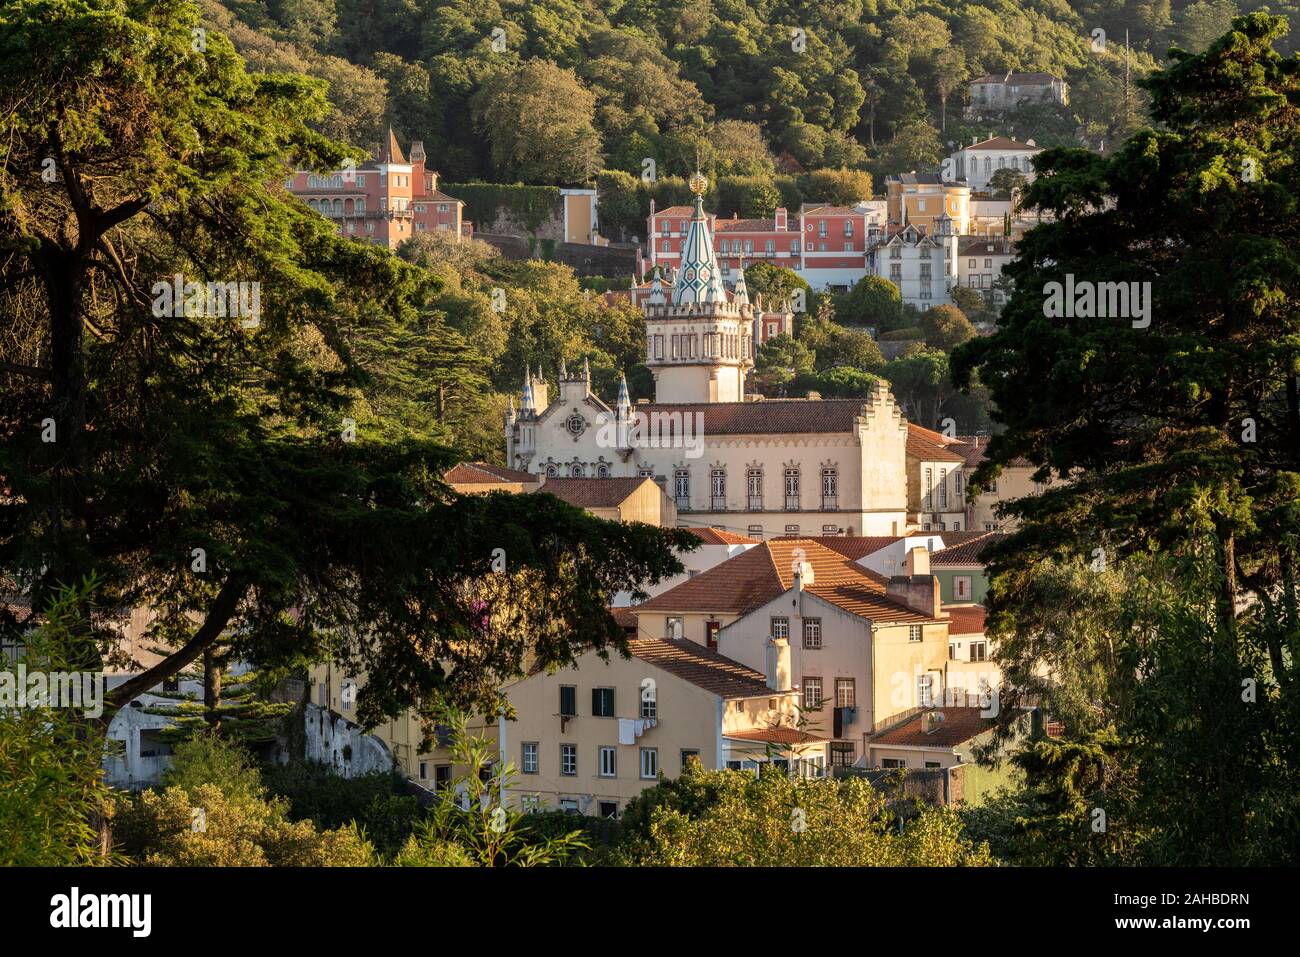 Sunset view of the Portuguese town of Sintra with the spectacular town hall in the foreground Stock Photo